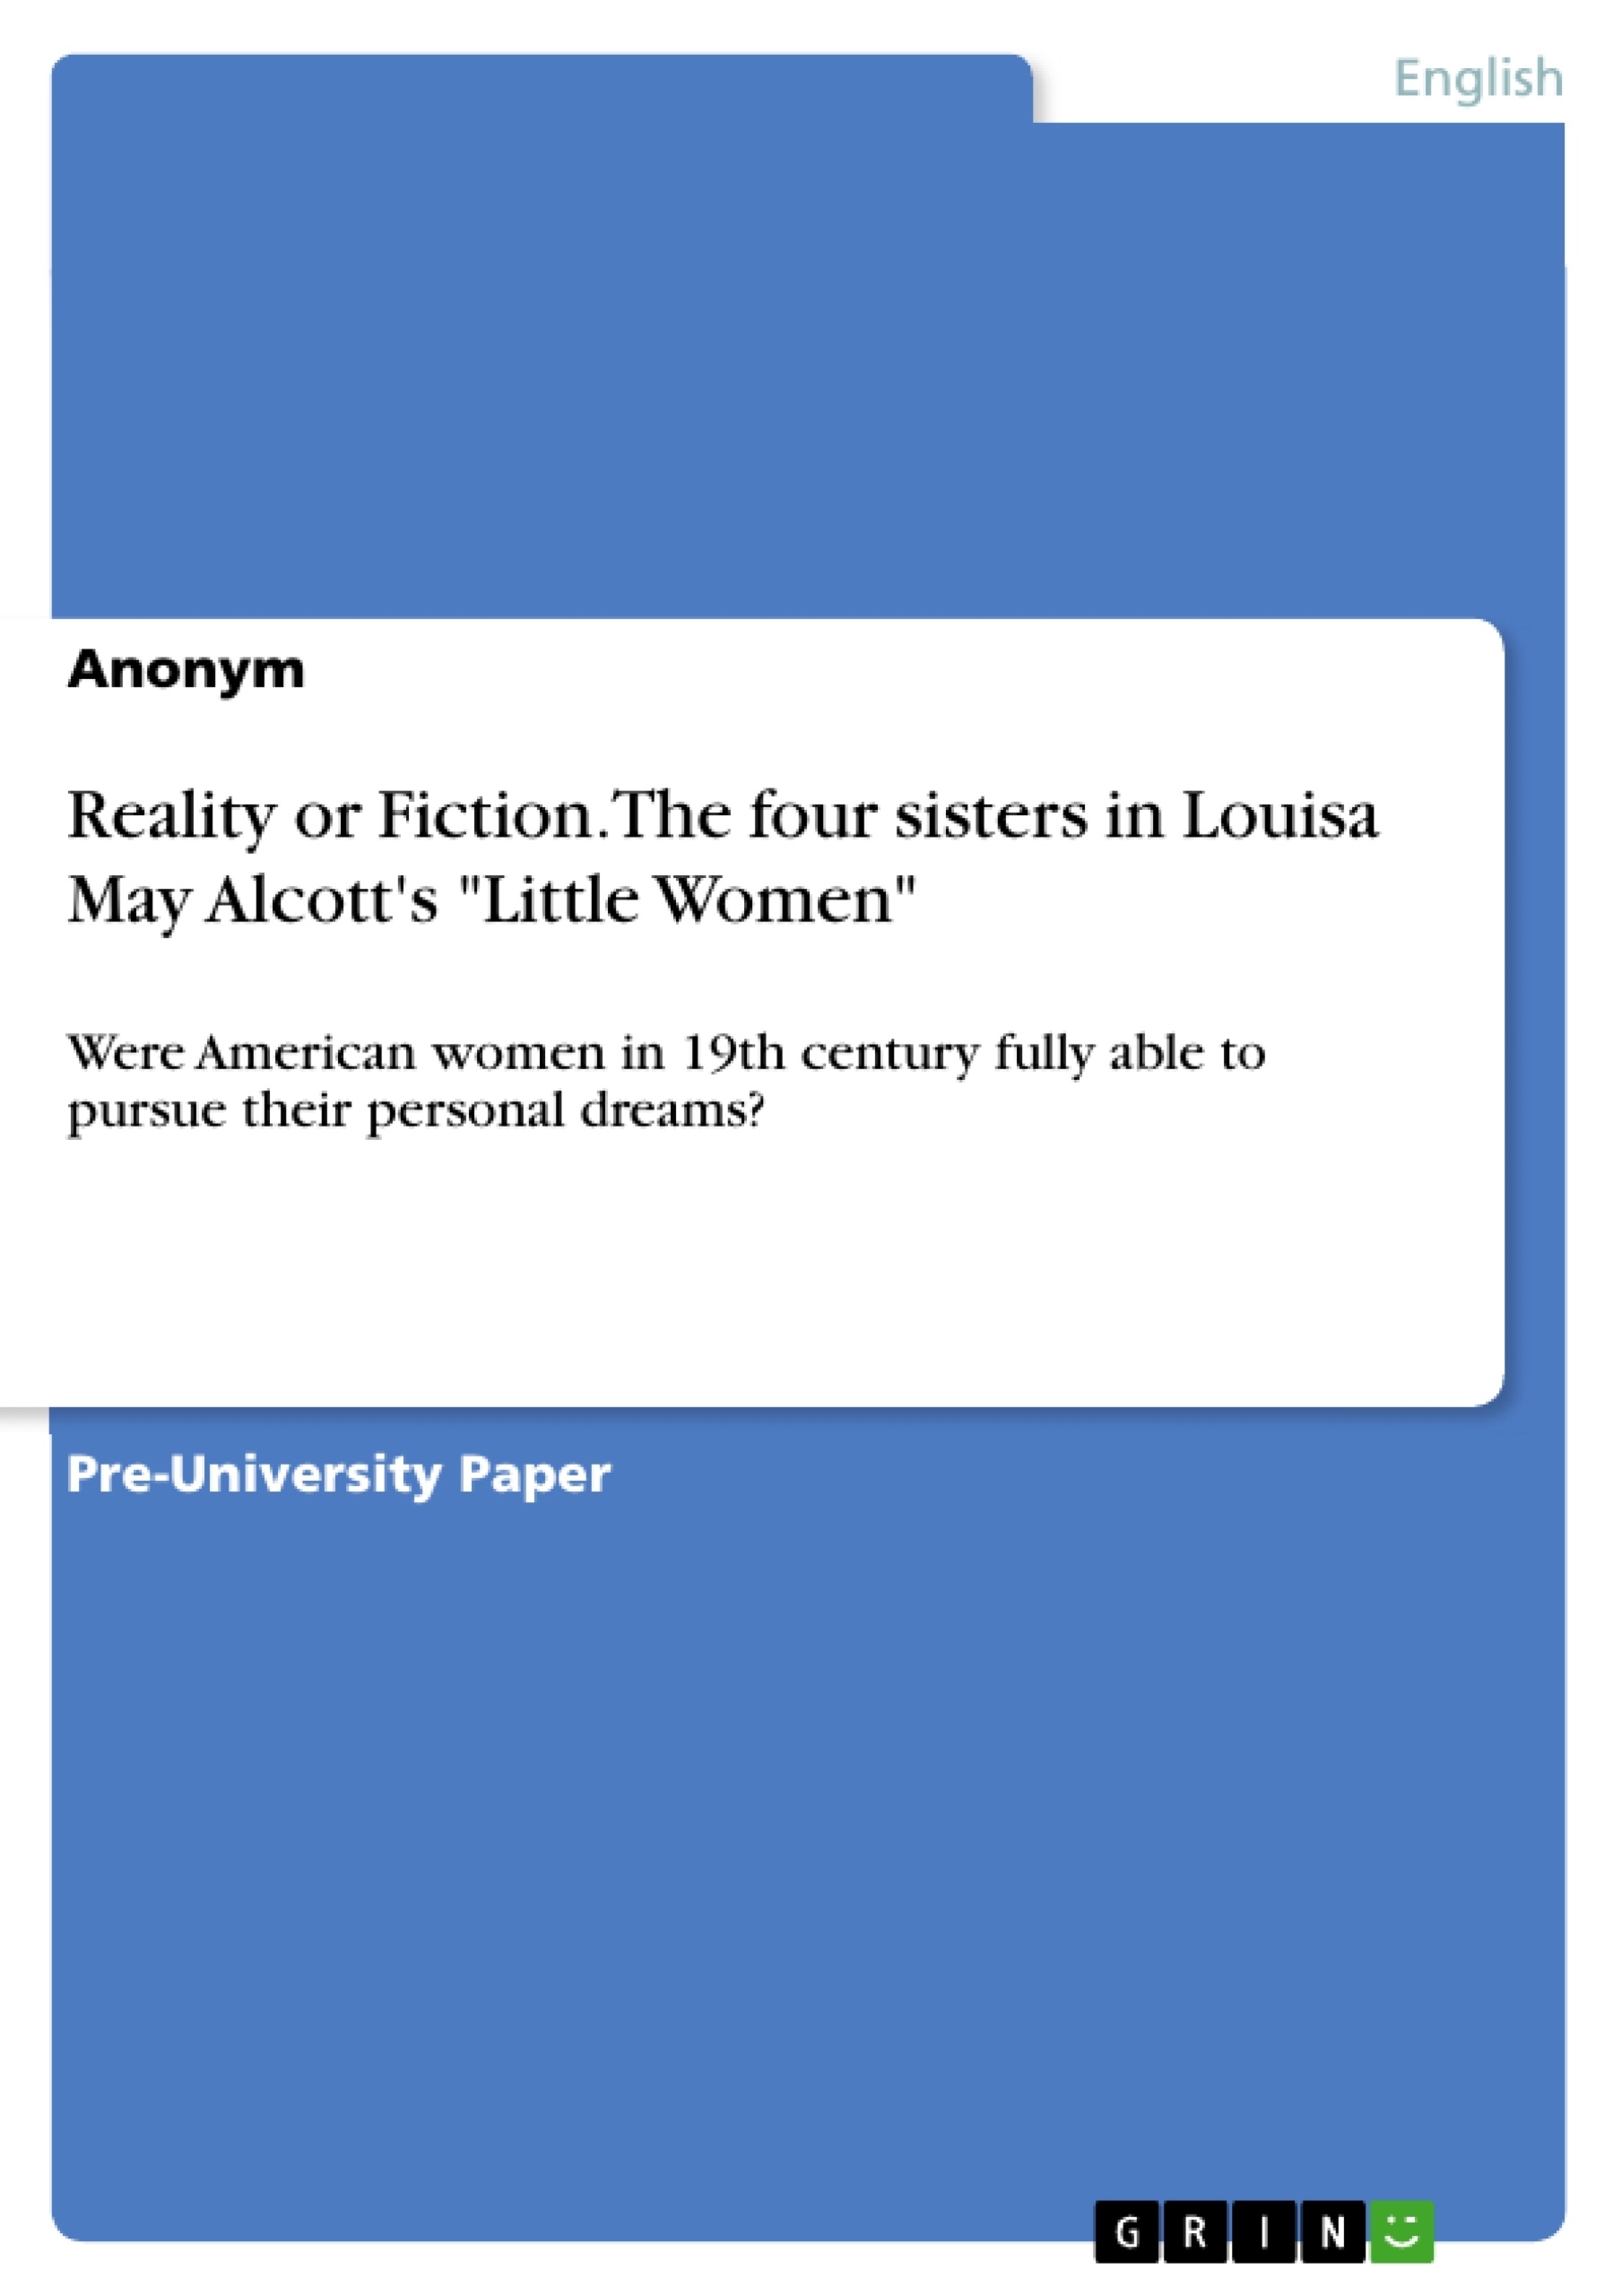 Titel: Reality or Fiction. The four sisters in Louisa May Alcott's "Little Women"